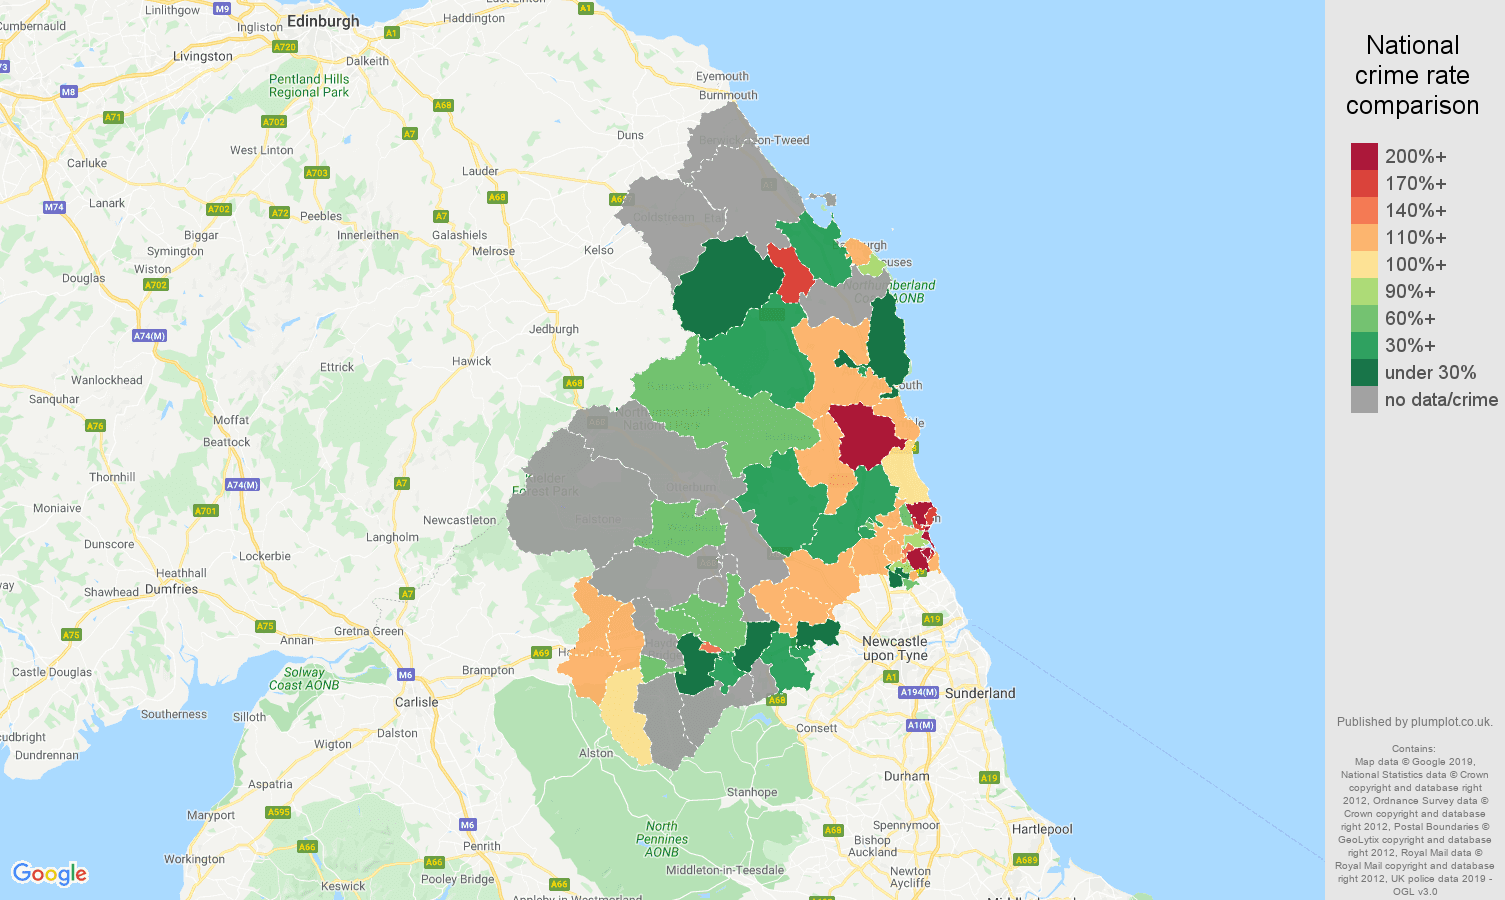 Northumberland other crime rate comparison map